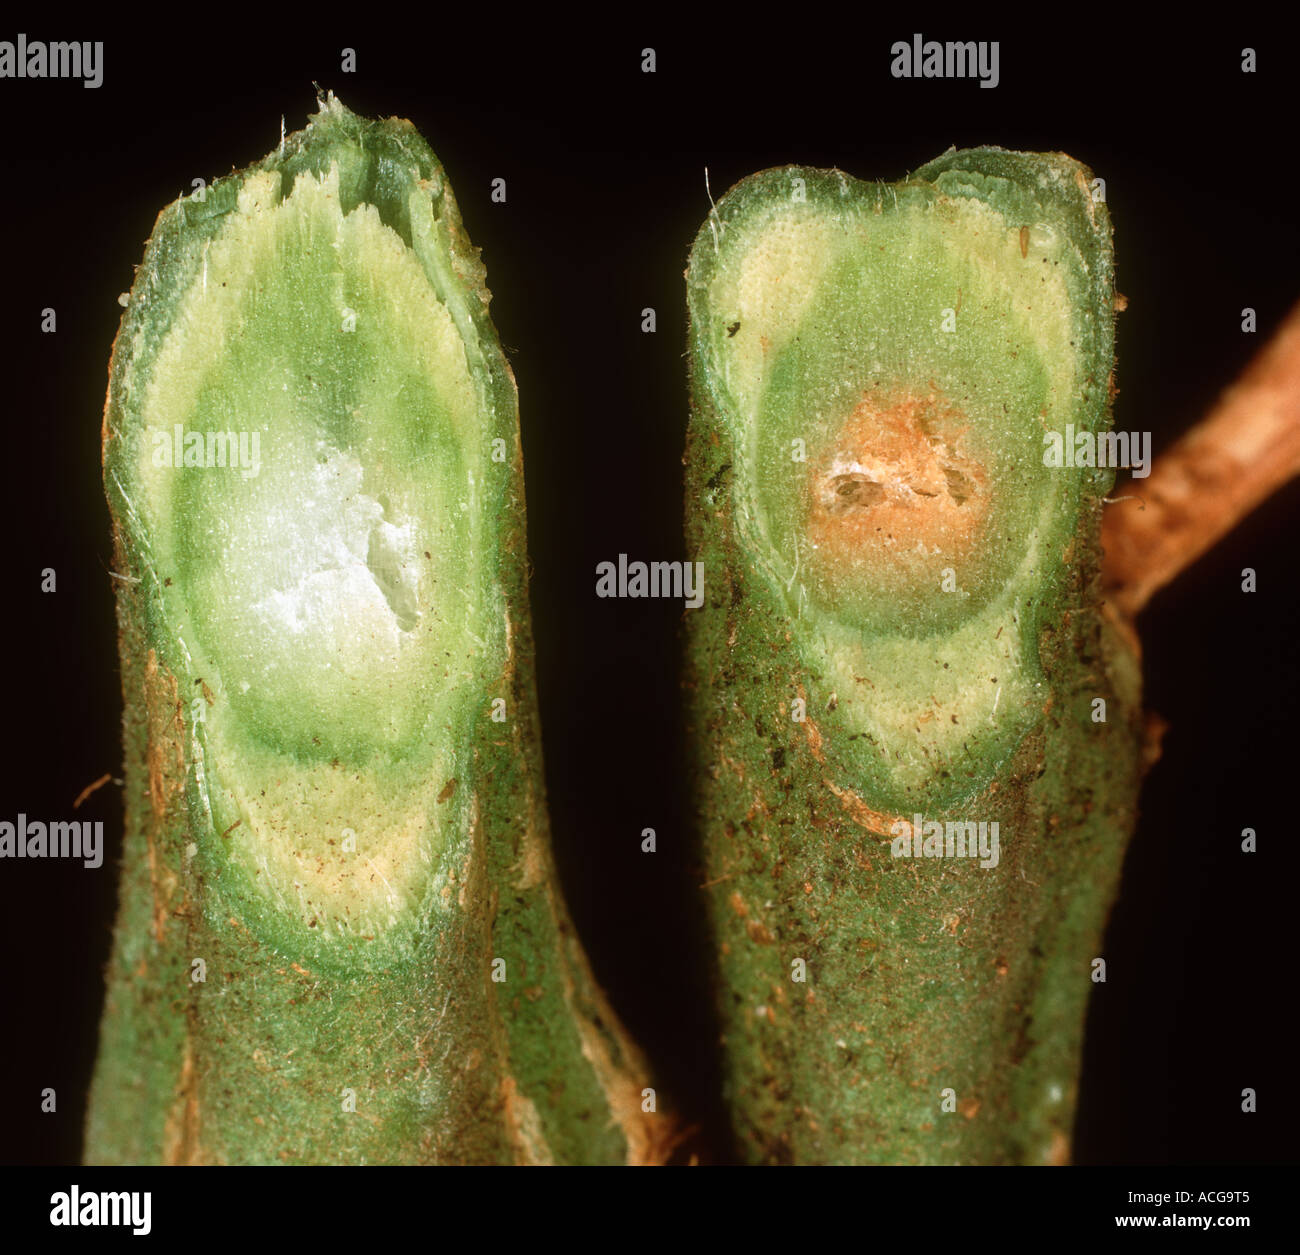 Tomato stem section comparing healthy to one affected by root rot Fusarium oxysporum Stock Photo